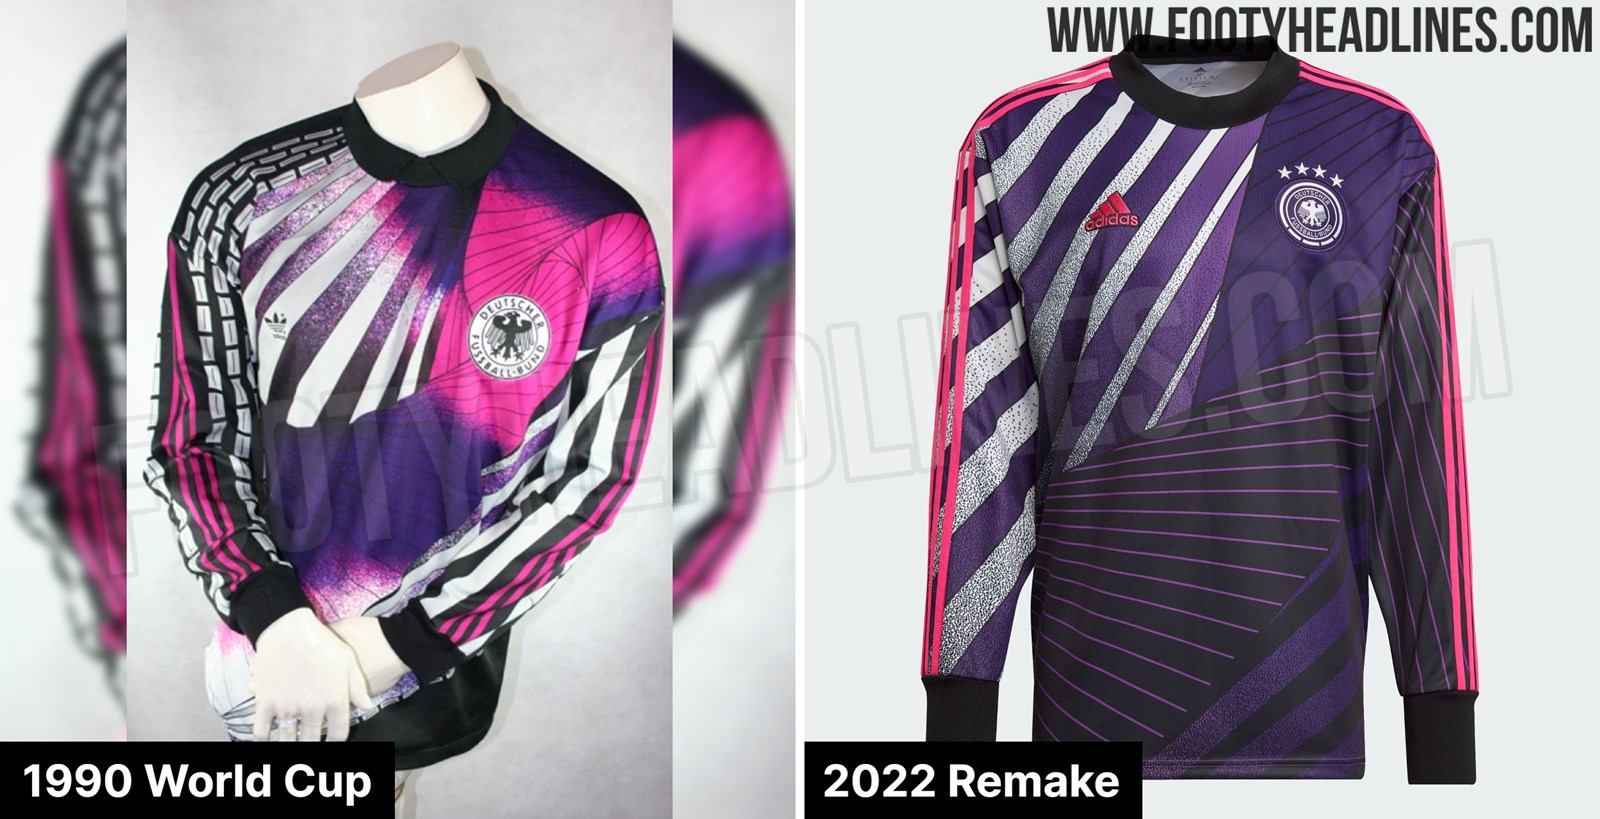 adidas release 2022 World Cup retro goalkeeper collection